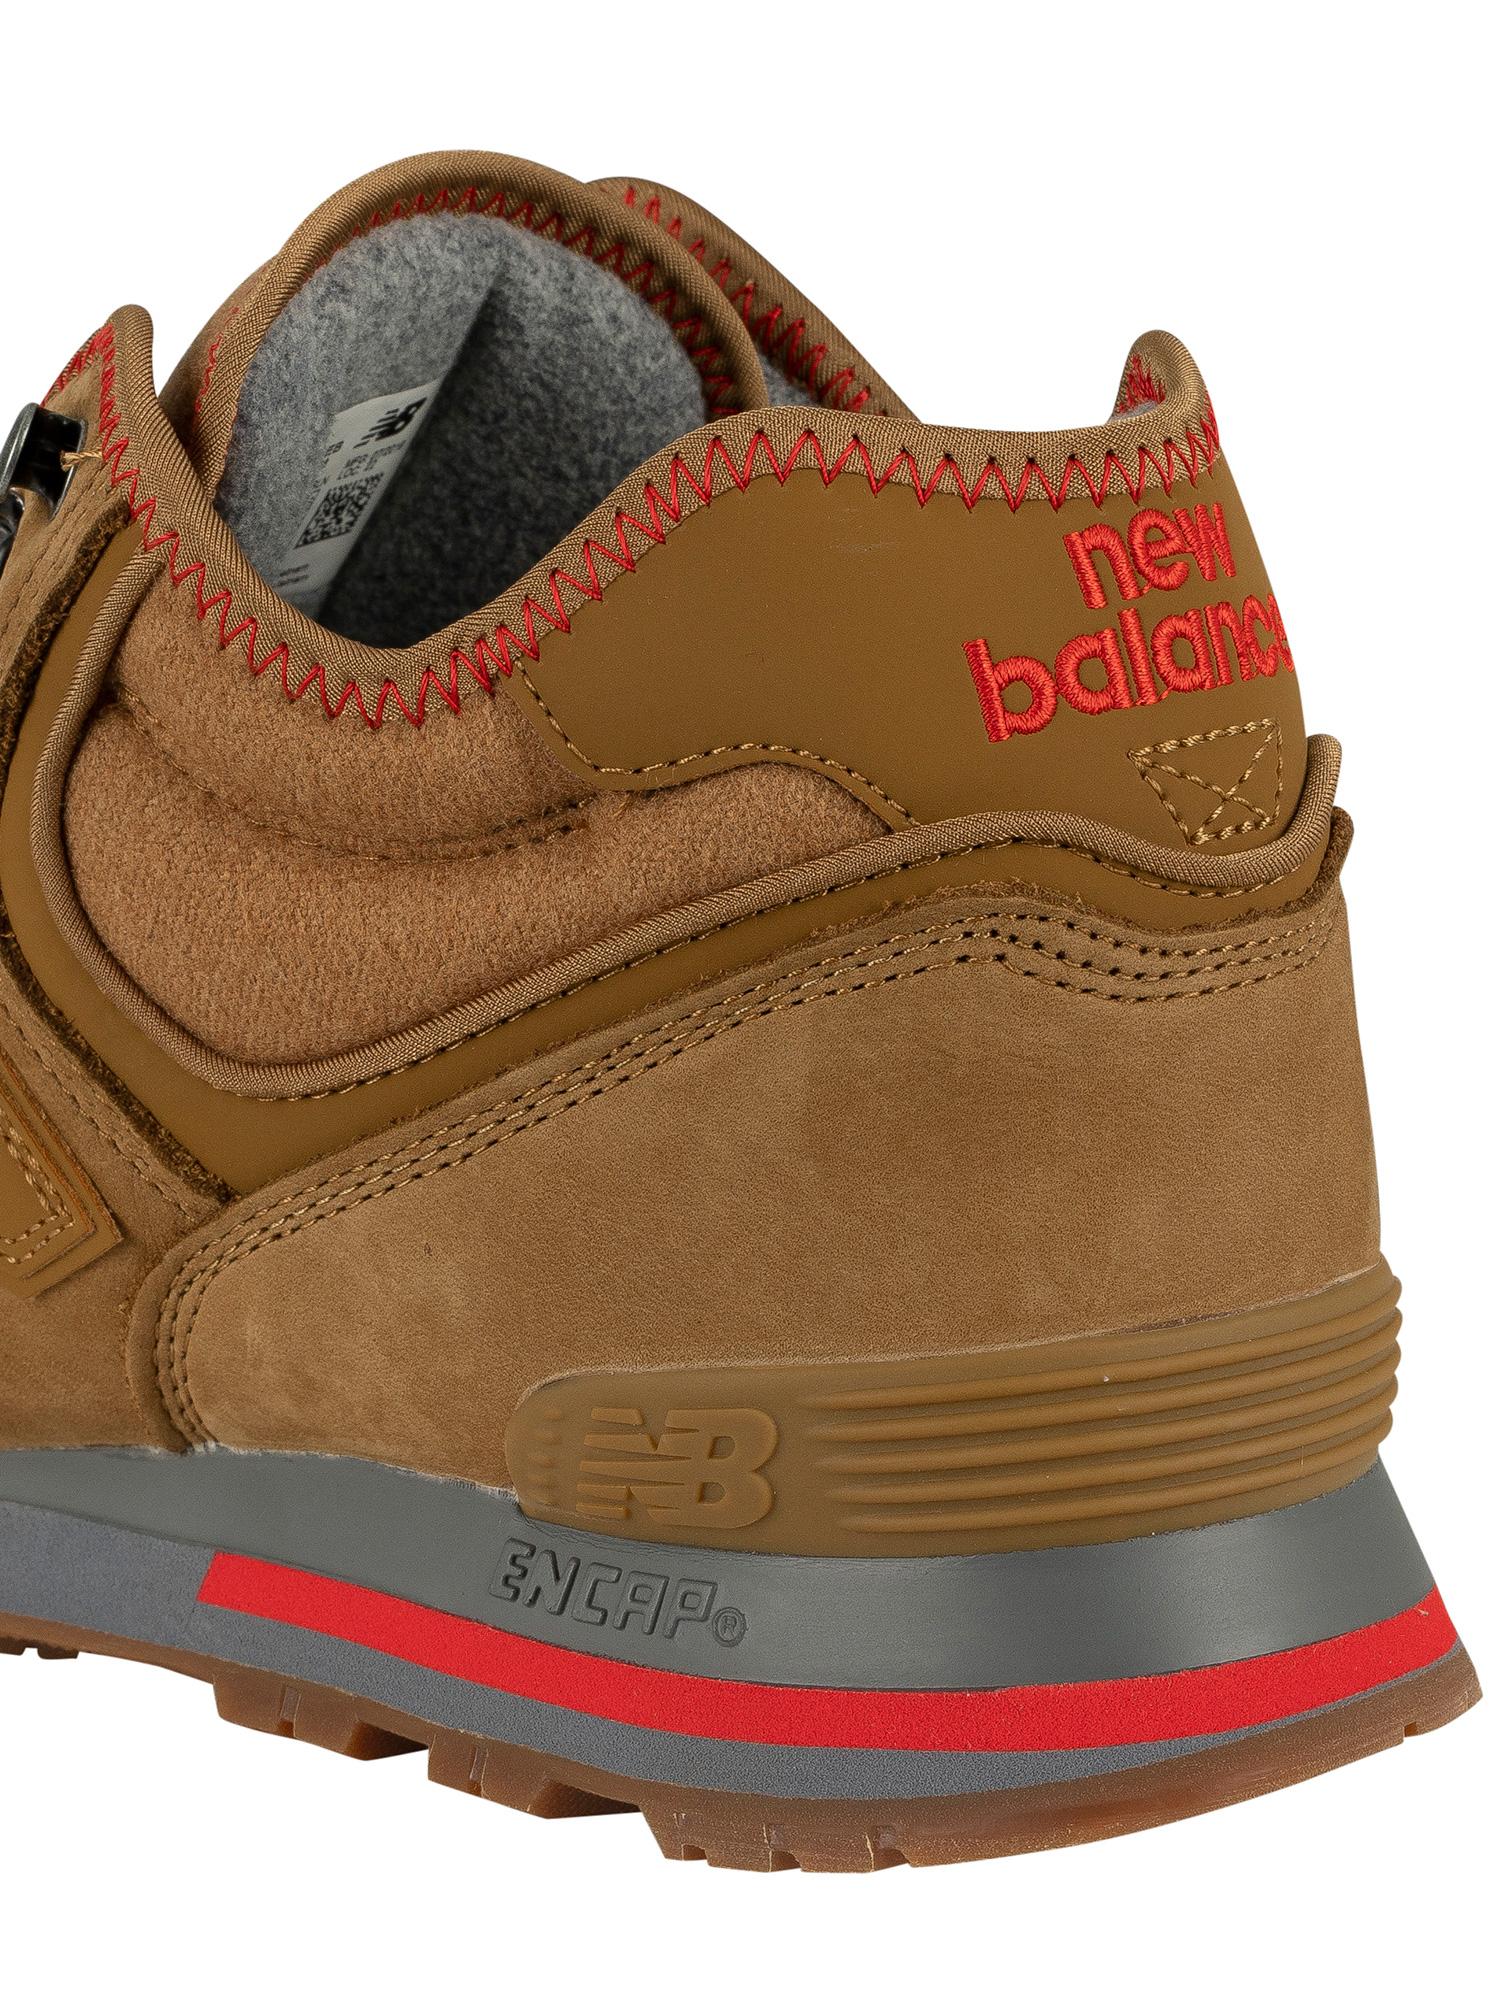 New Balance Leather 574 Mid Premium Hiker Trainers in Brown for Men | Lyst